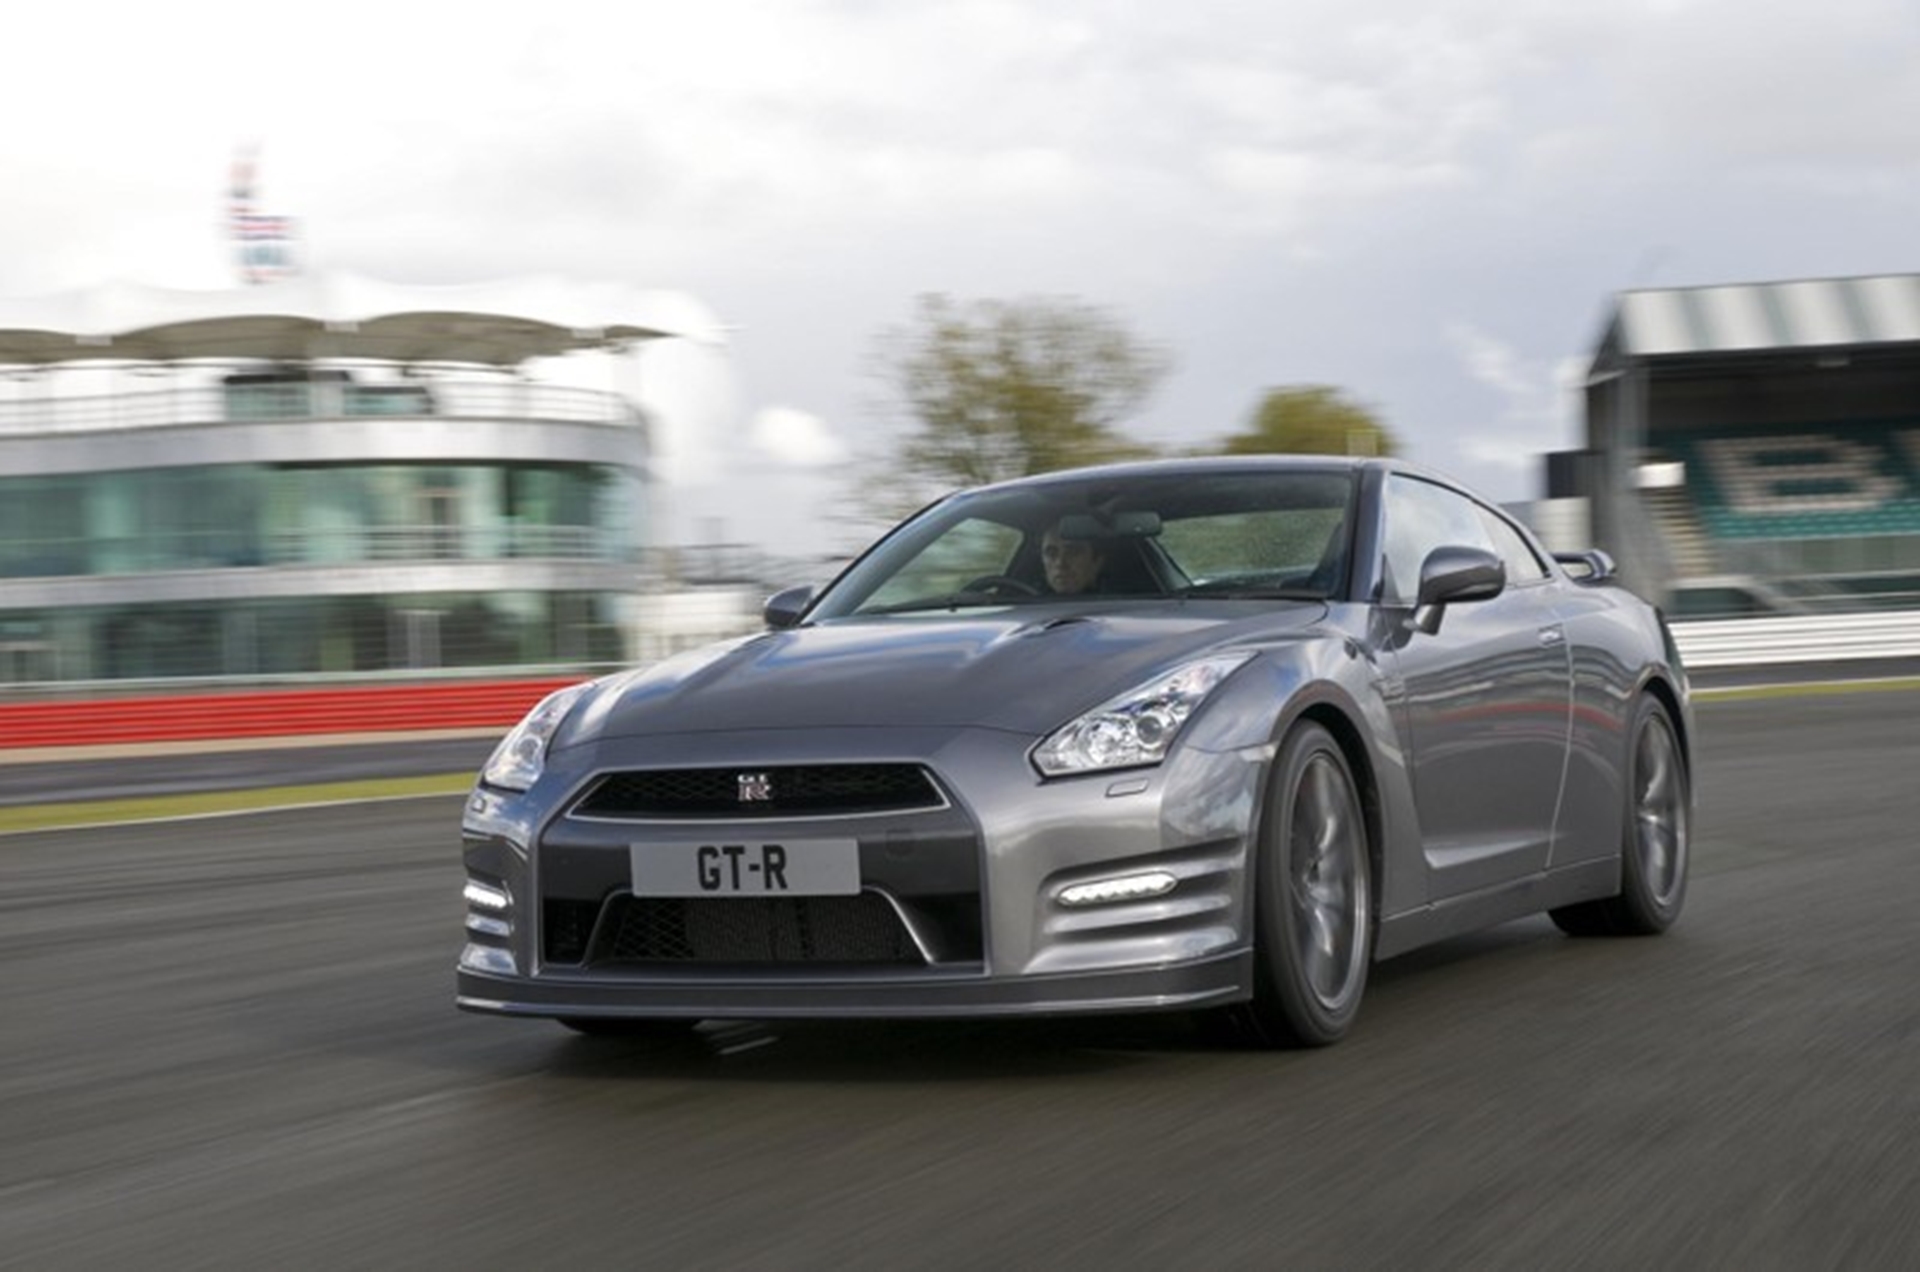 NISSAN REVEALS THE 2012 MODEL YEAR GT-R